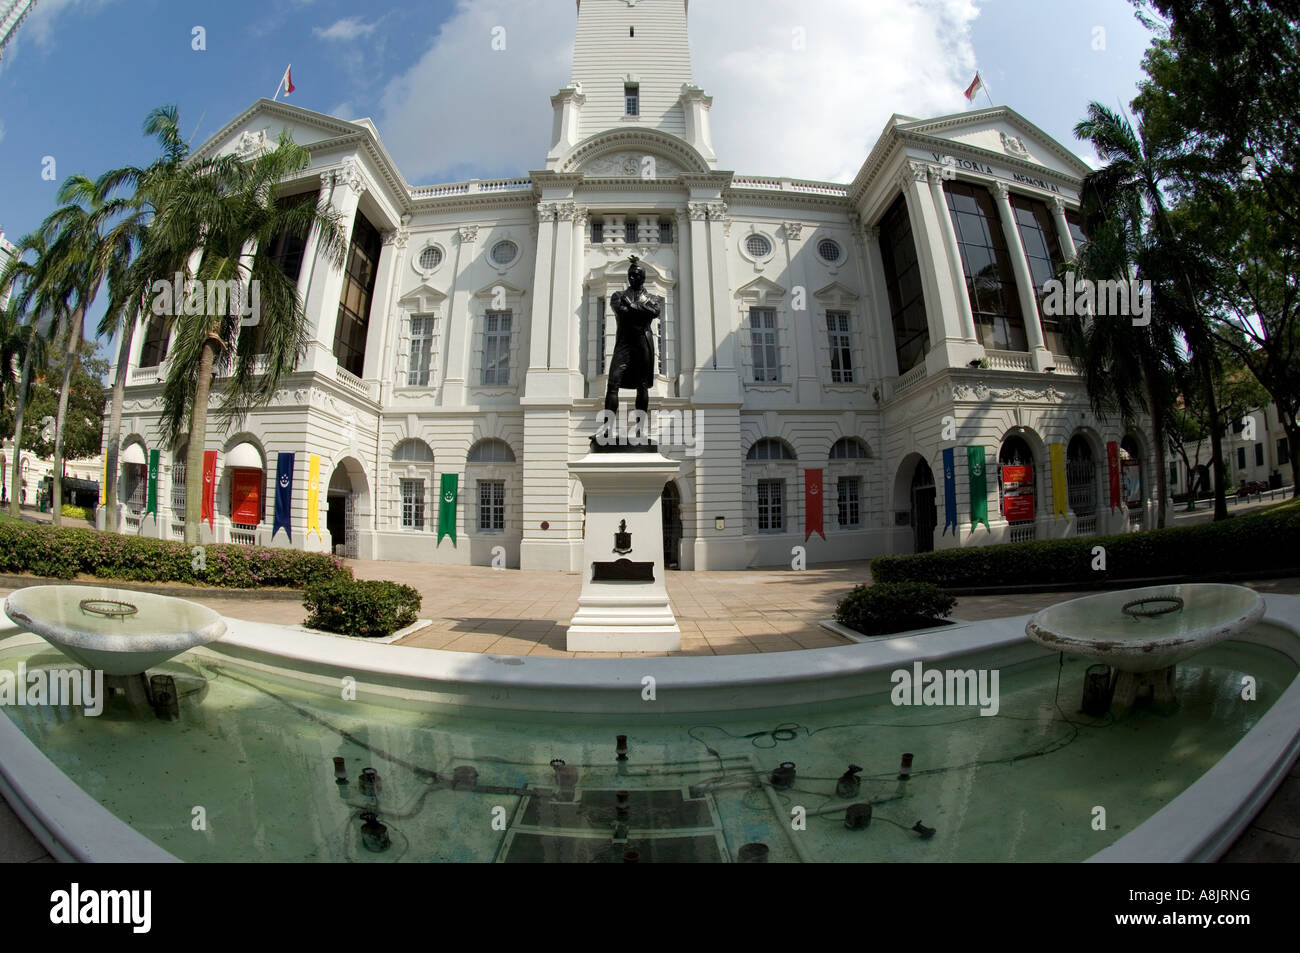 Fish eye of fountain and old colonial Government building, Singapore Stock Photo